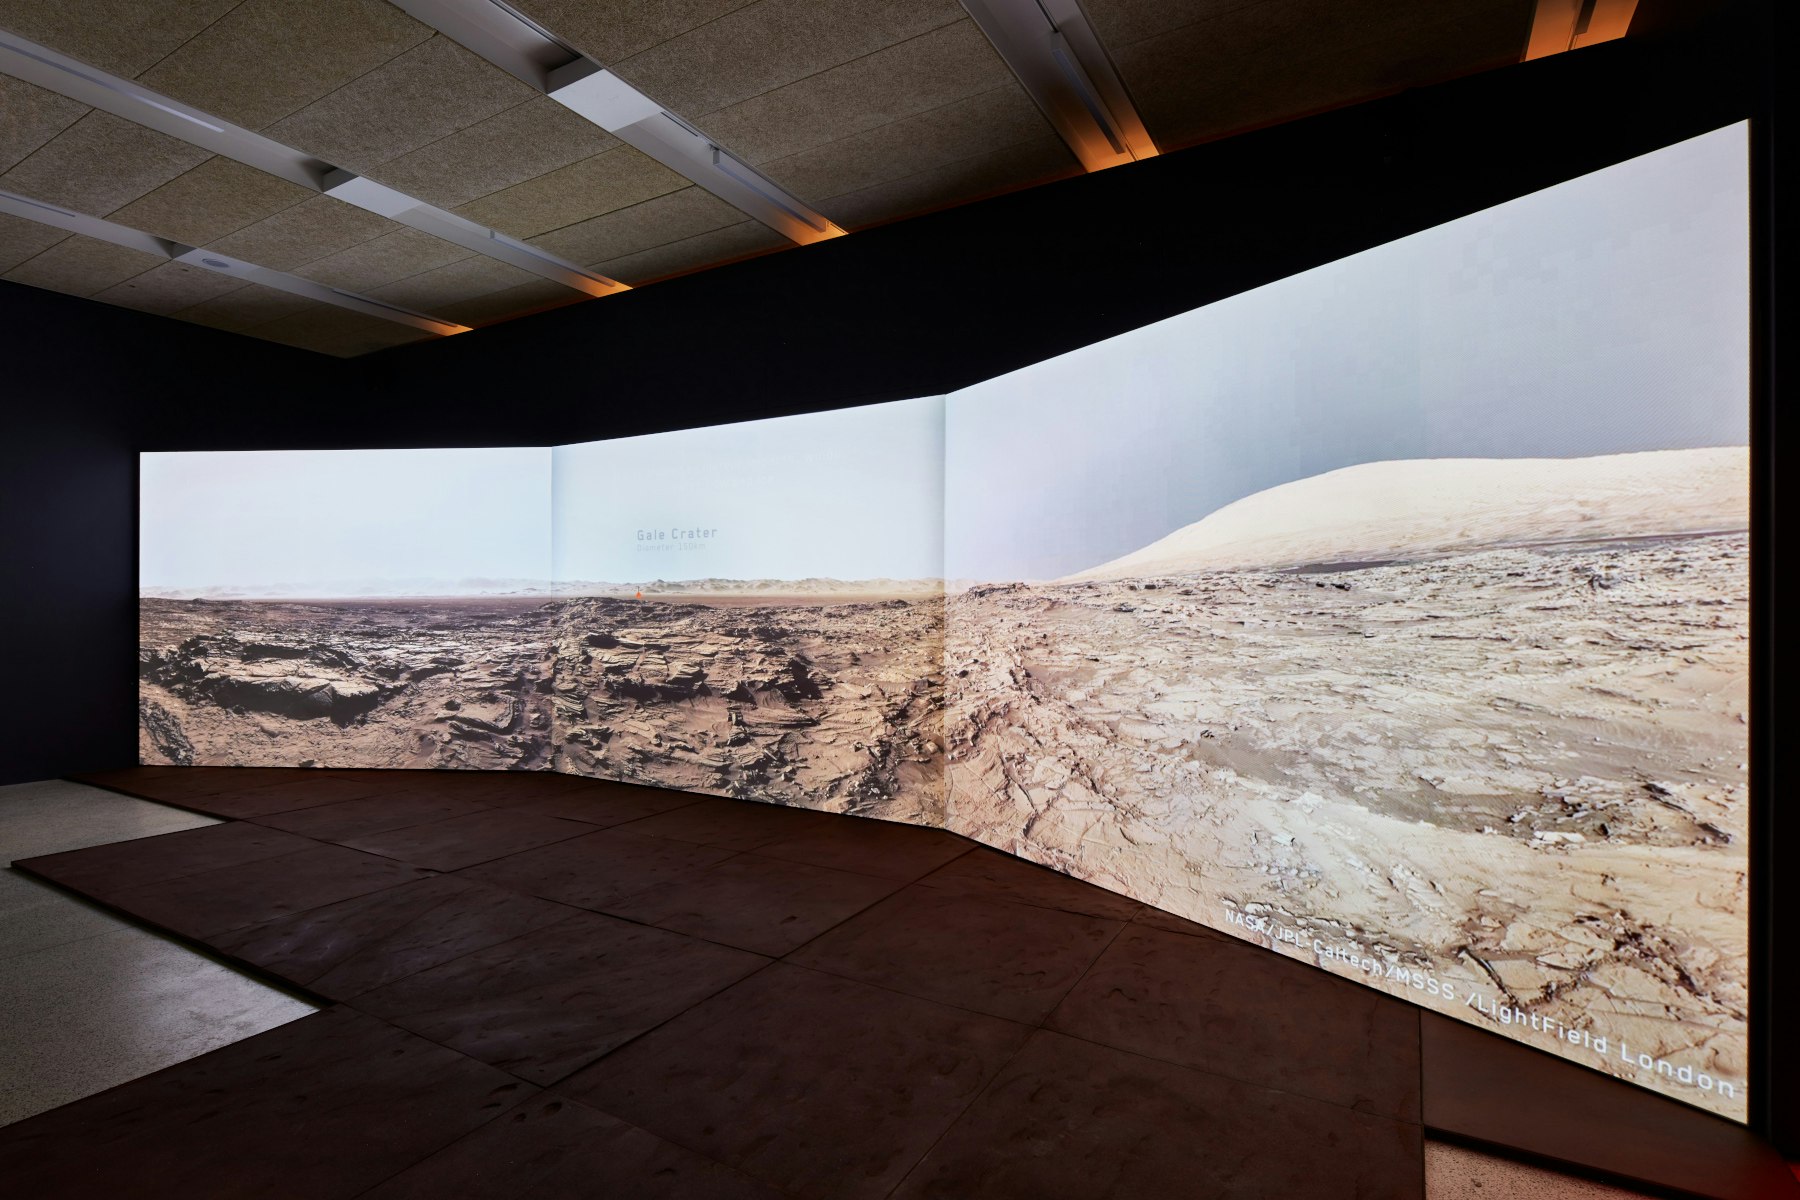 A picture of a Martian landscape on huge screens within the exhibition